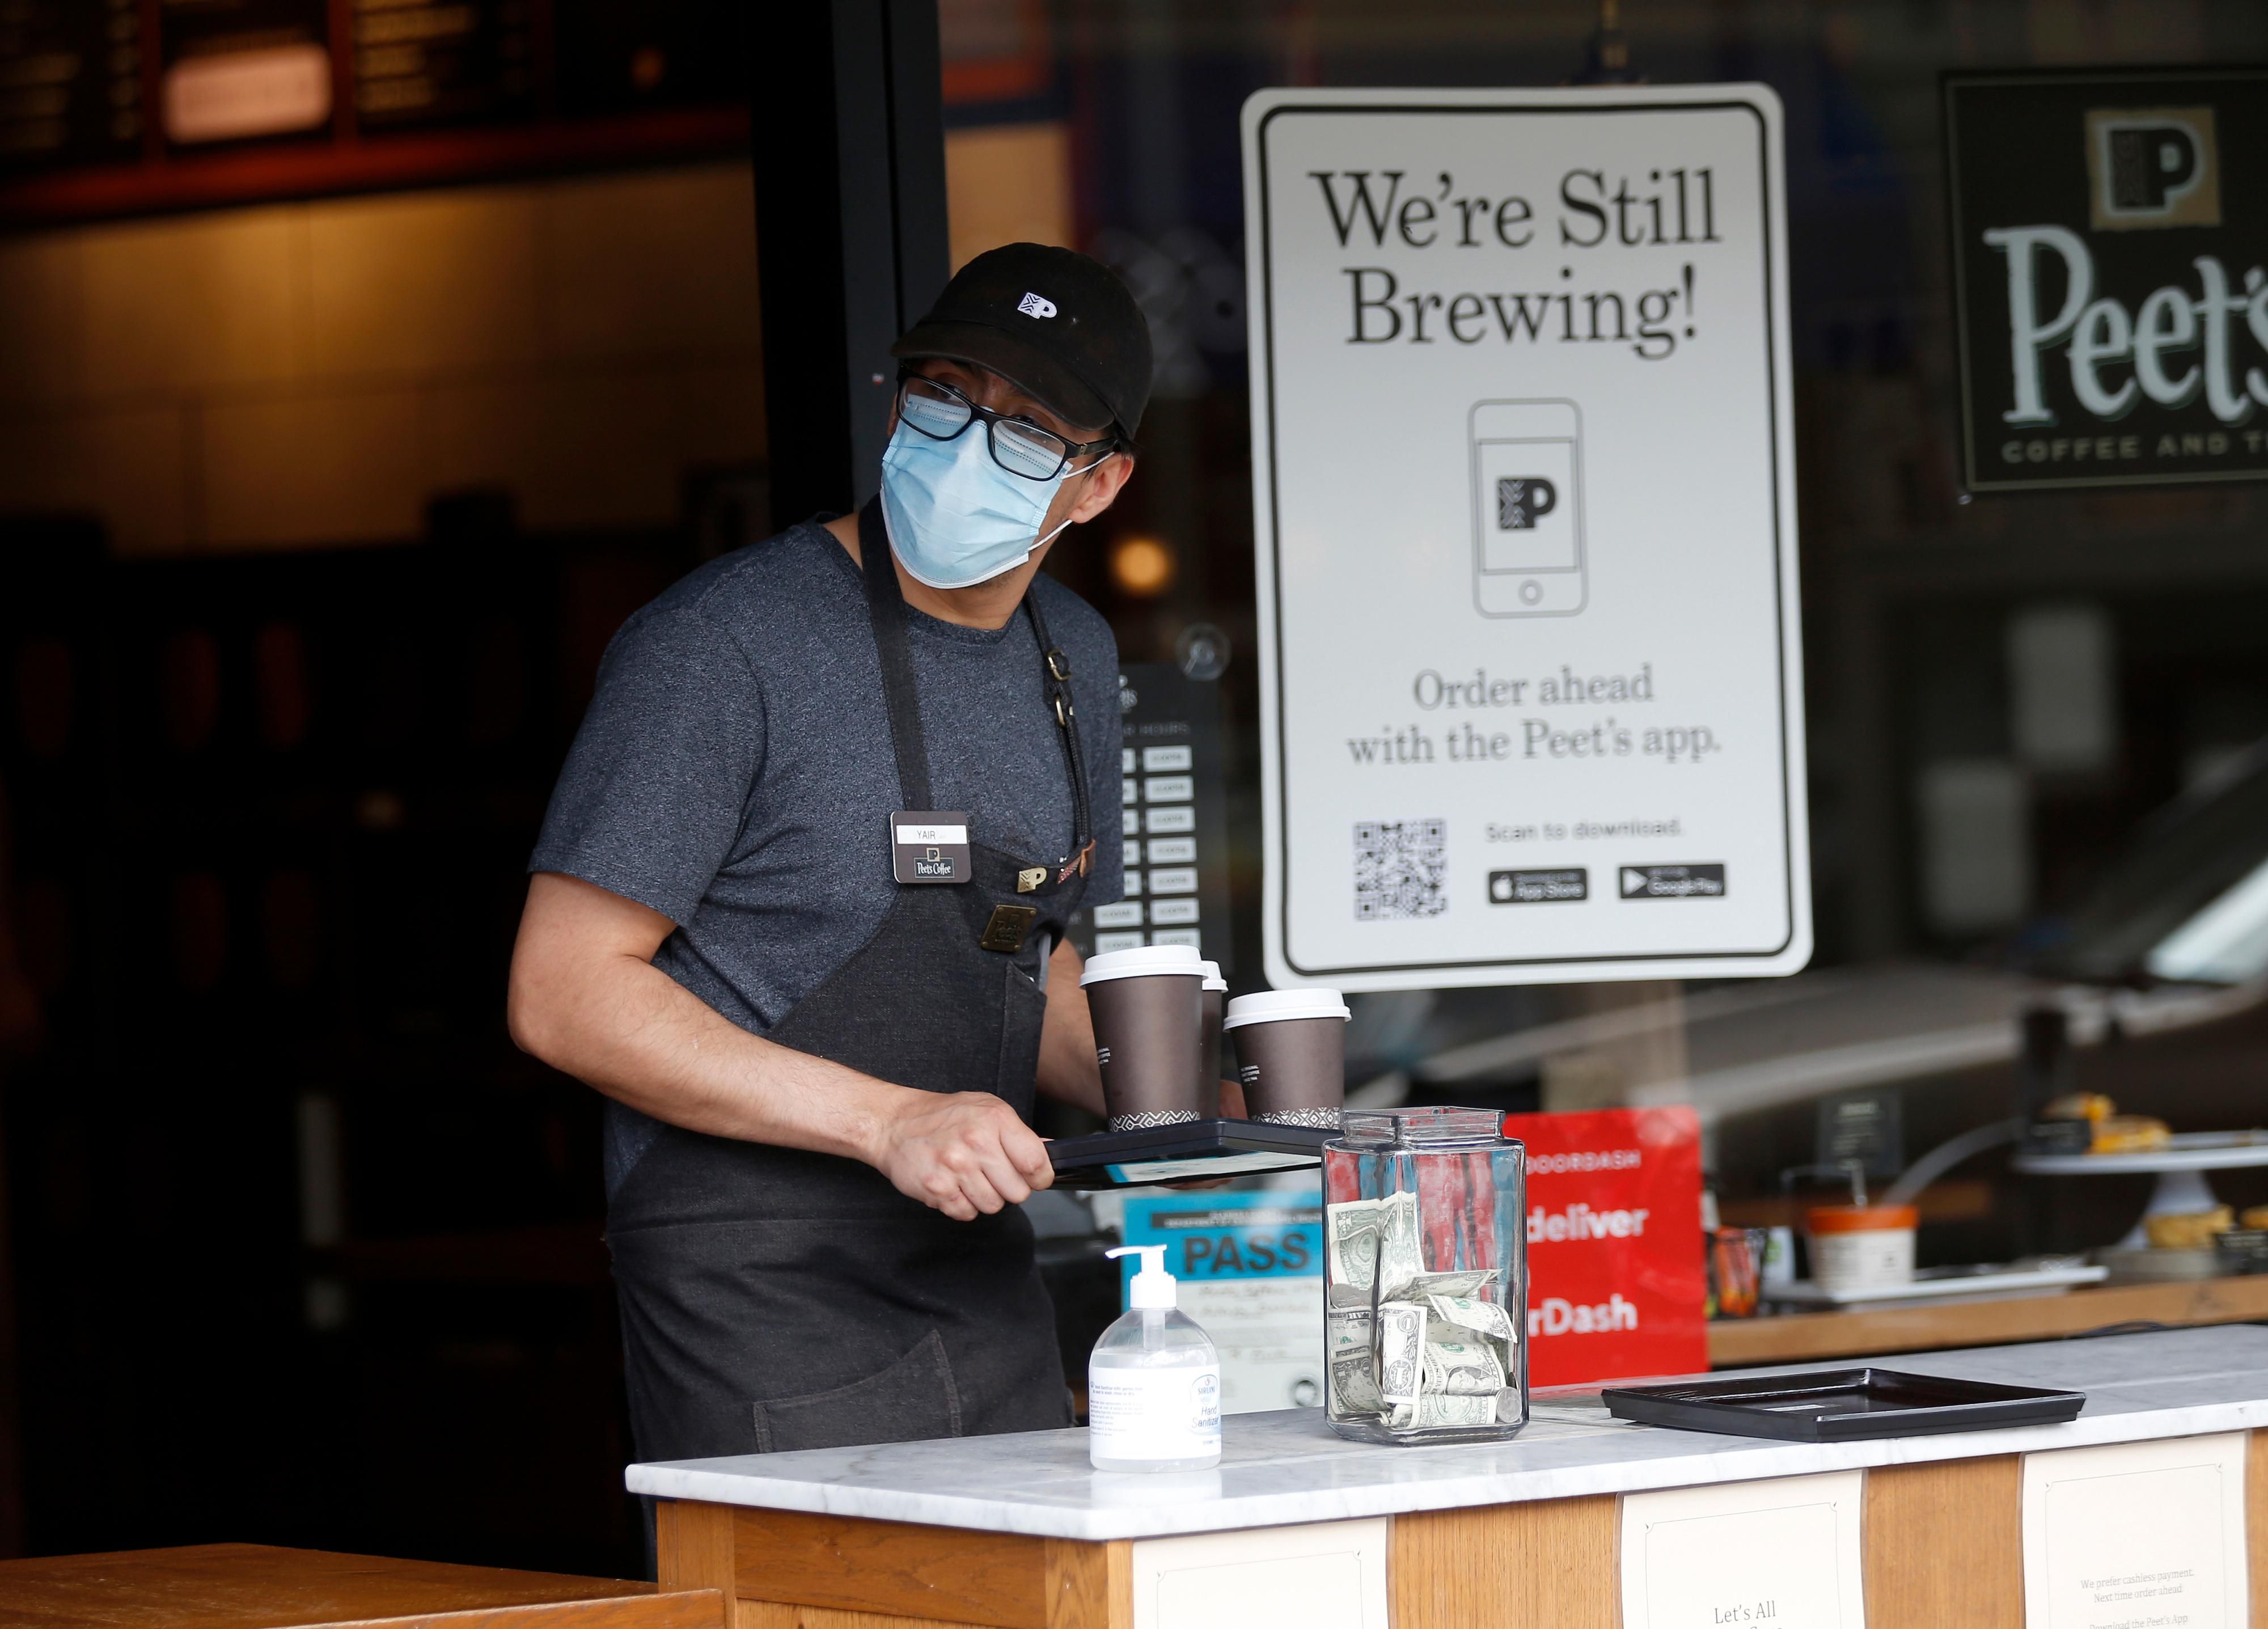 A Peet's coffee worker prepares a takeout order